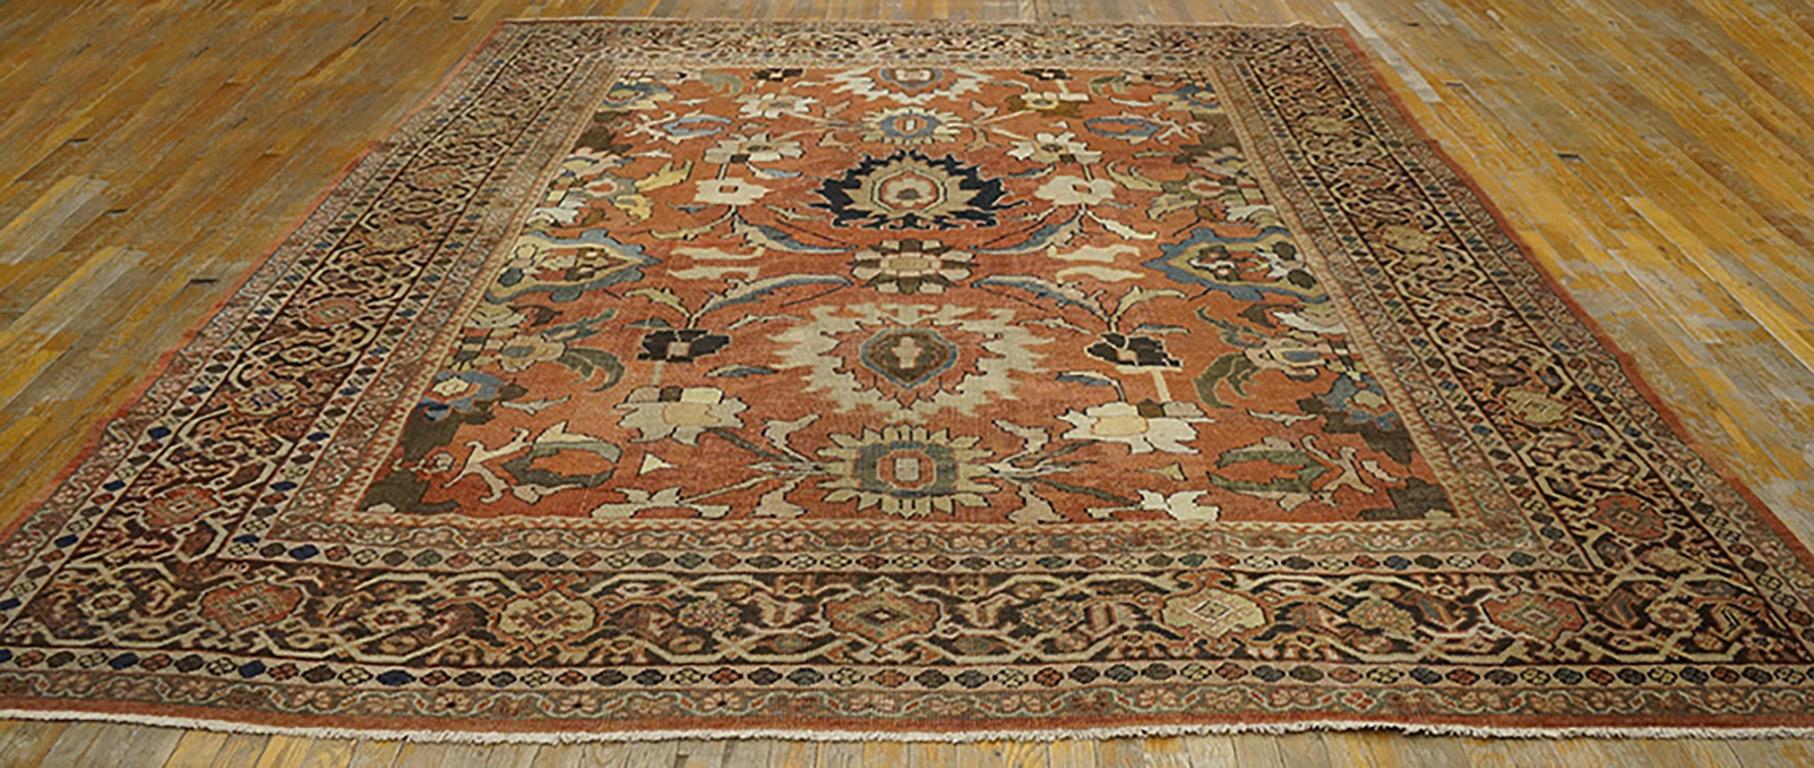 Antique Sultanabad Persian Rug 9'4